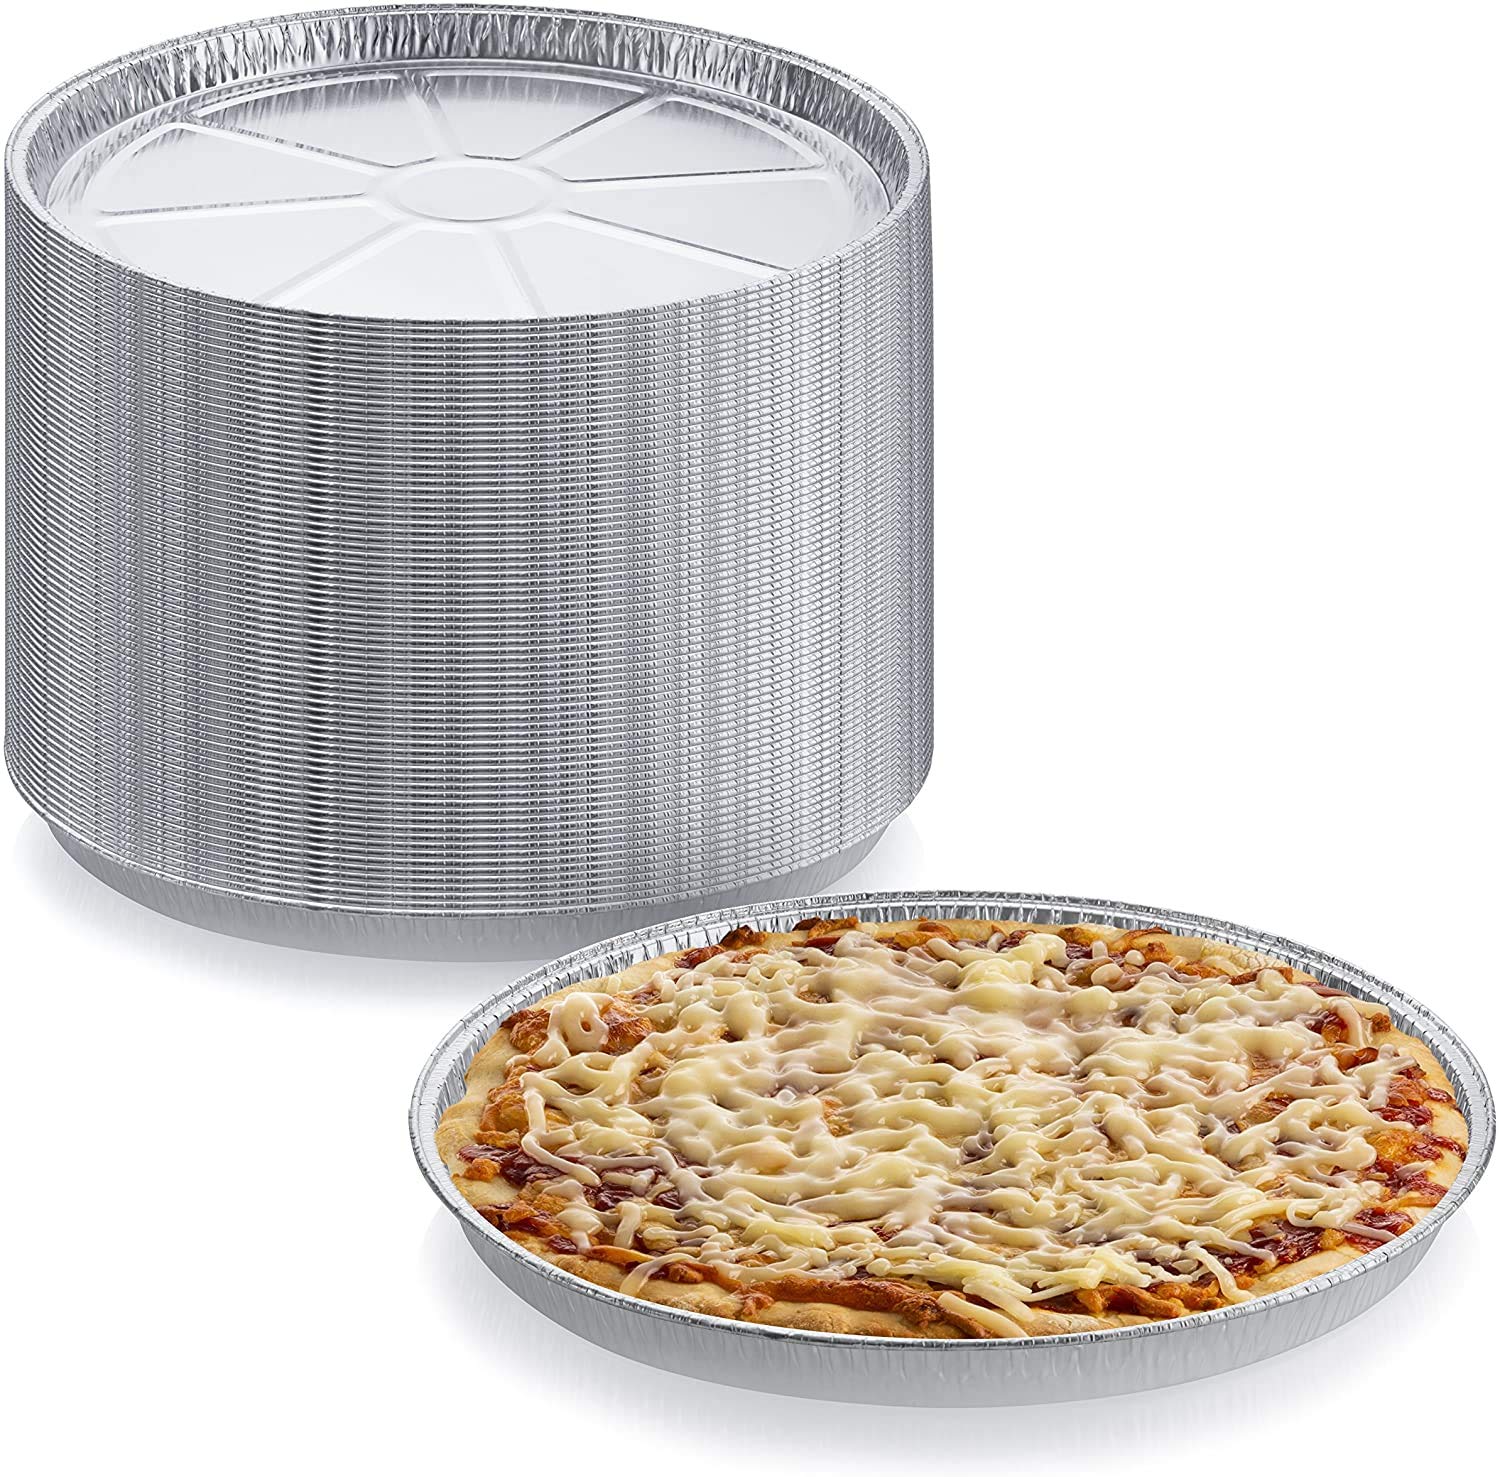 DCS Deals Pack of 12 Disposable Round Foil Pizza Pans – Durable Pizza Tray for Cookies, Cake, Focaccia and More – Size: 12-1/4